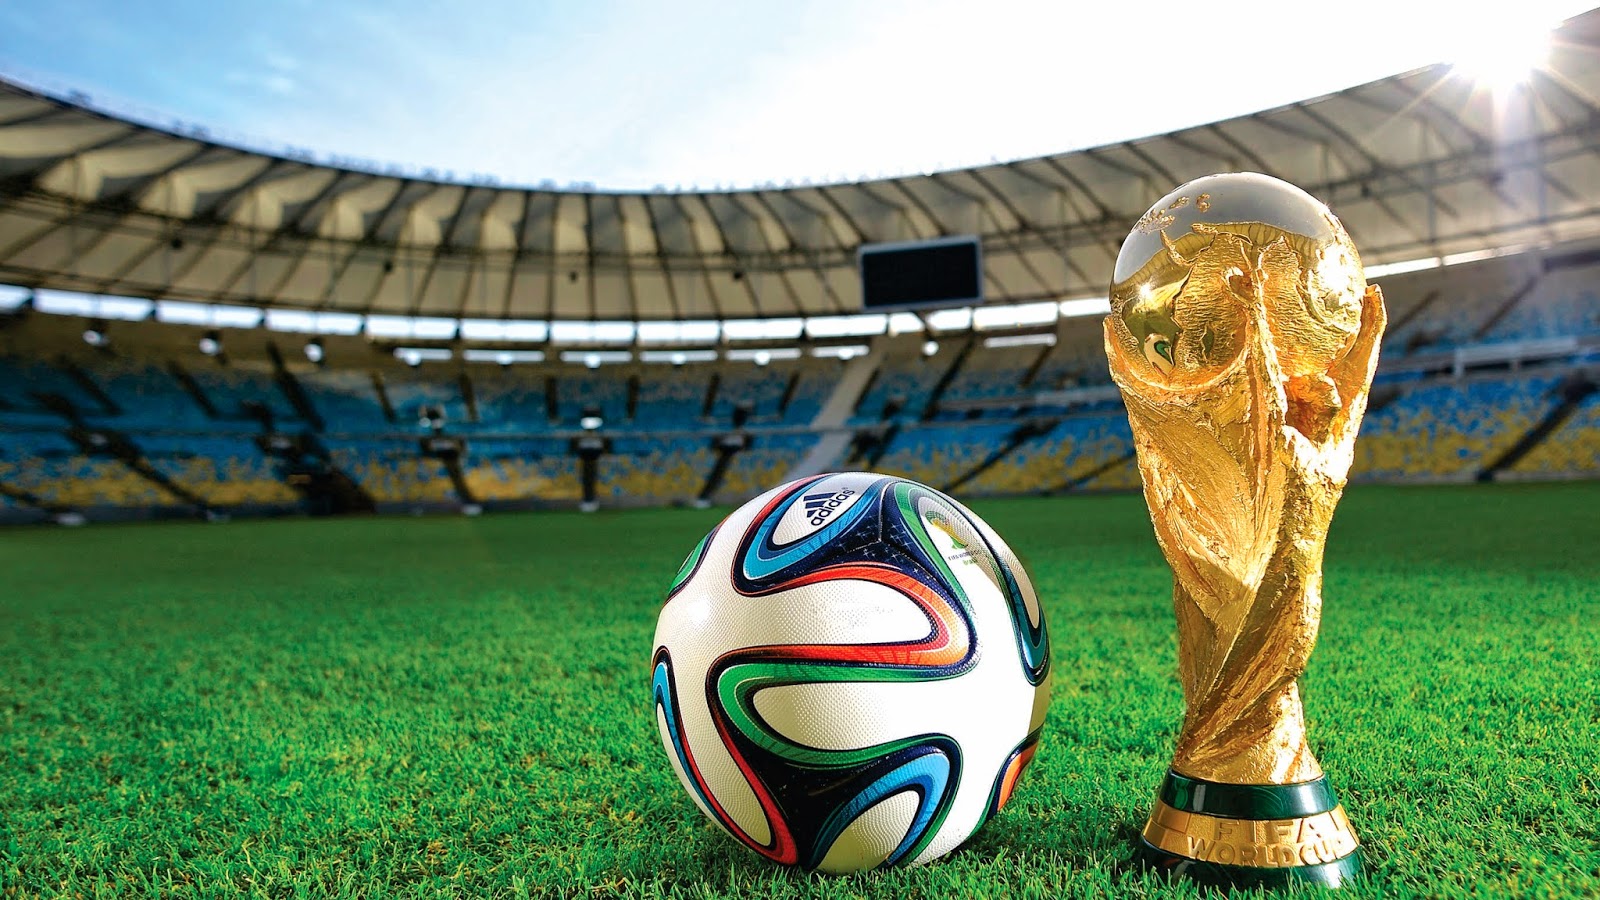 Fifa World Cup 2014-15 Hd Wallpapers | All Football Players HD